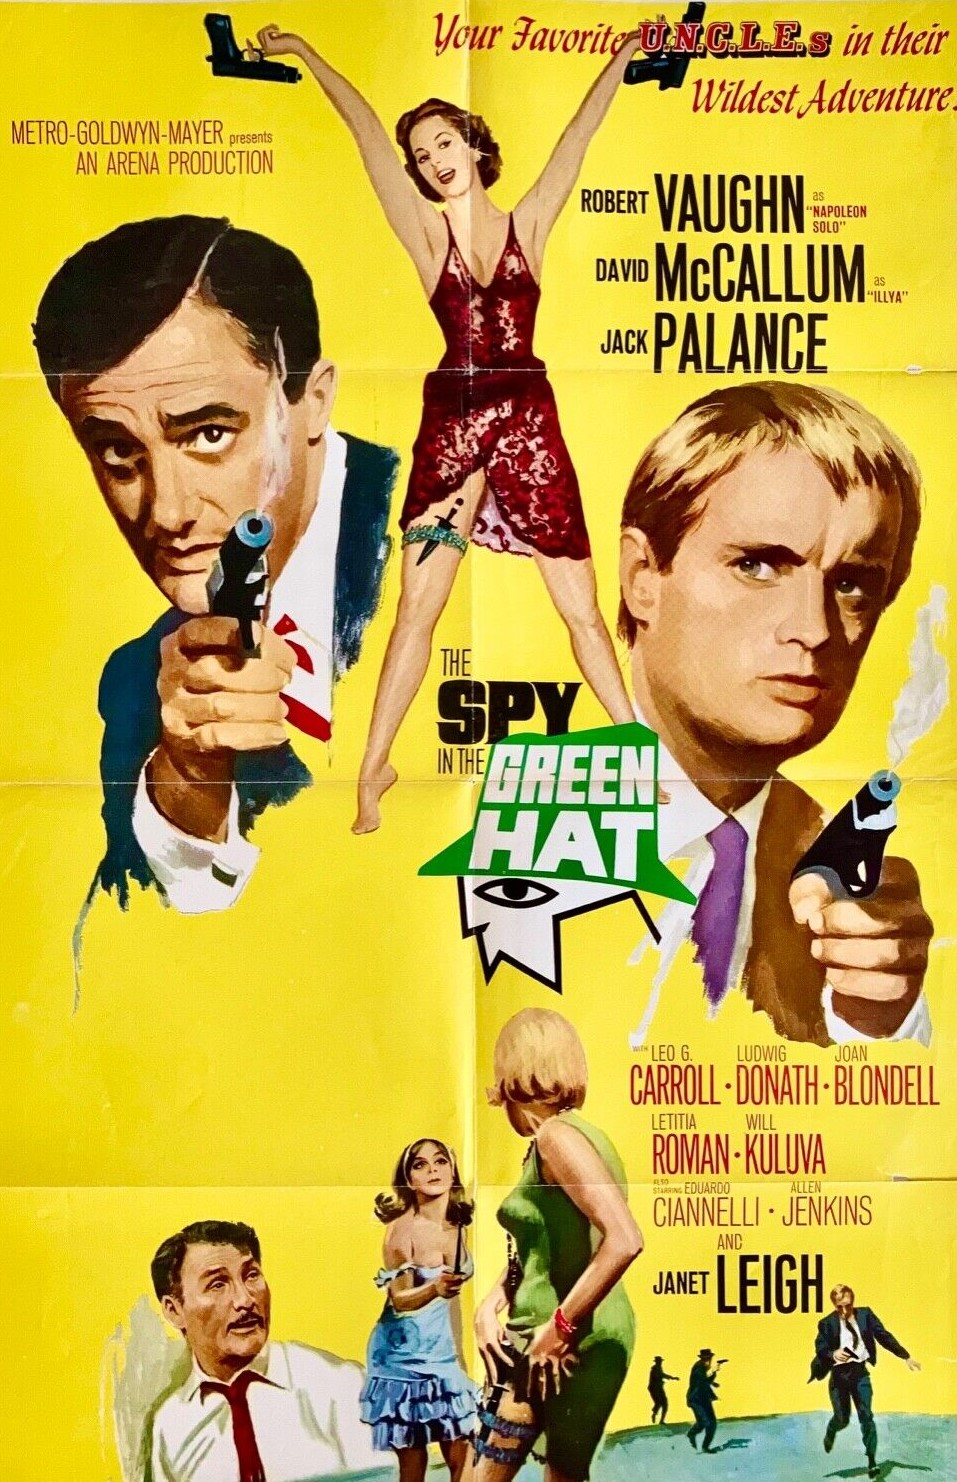 The Spy in The Green Hat (1966) ***